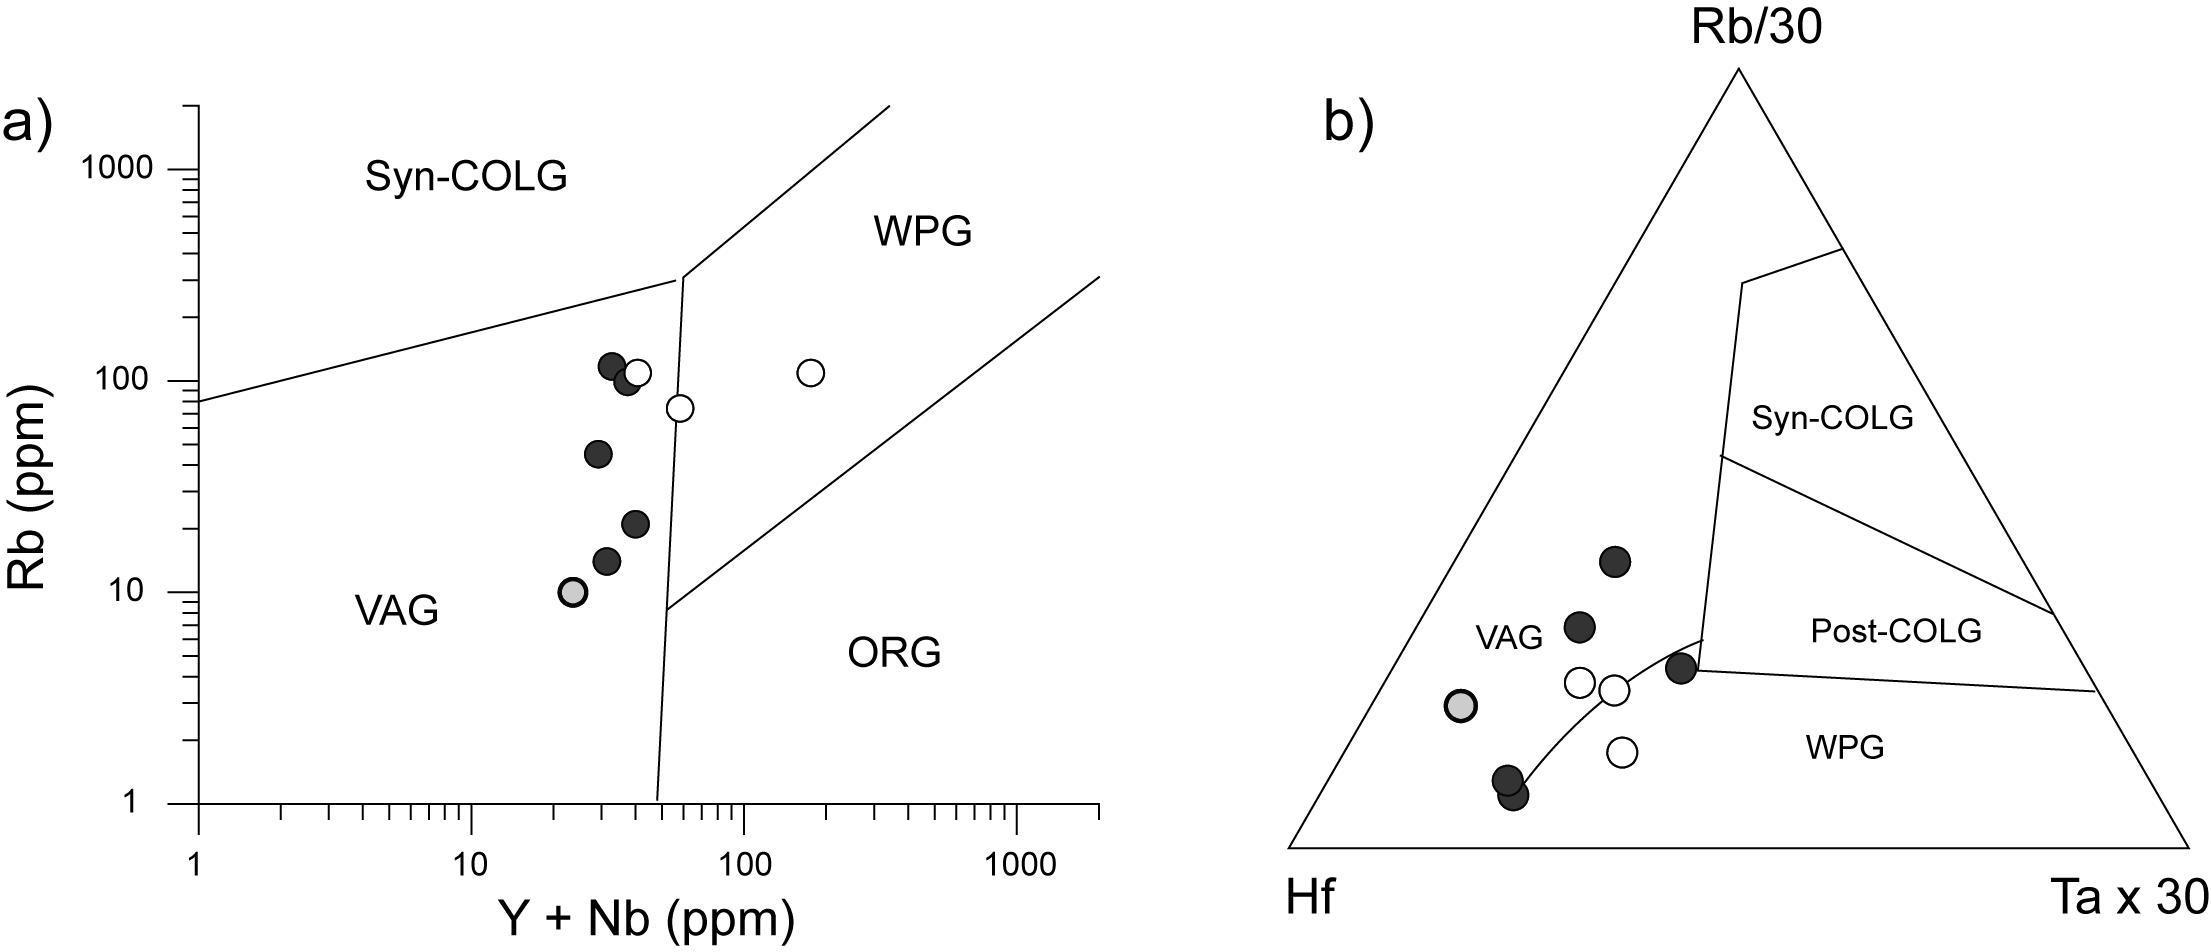 Middle Paleozoic orthogneisses from the Wolhyeonri complex plotted on (a) Rb/(Y + Nb) (Pearce et al., 1984; Pearce, 1996) and (b) Rb–Hf–Ta (Harris et al., 1986).